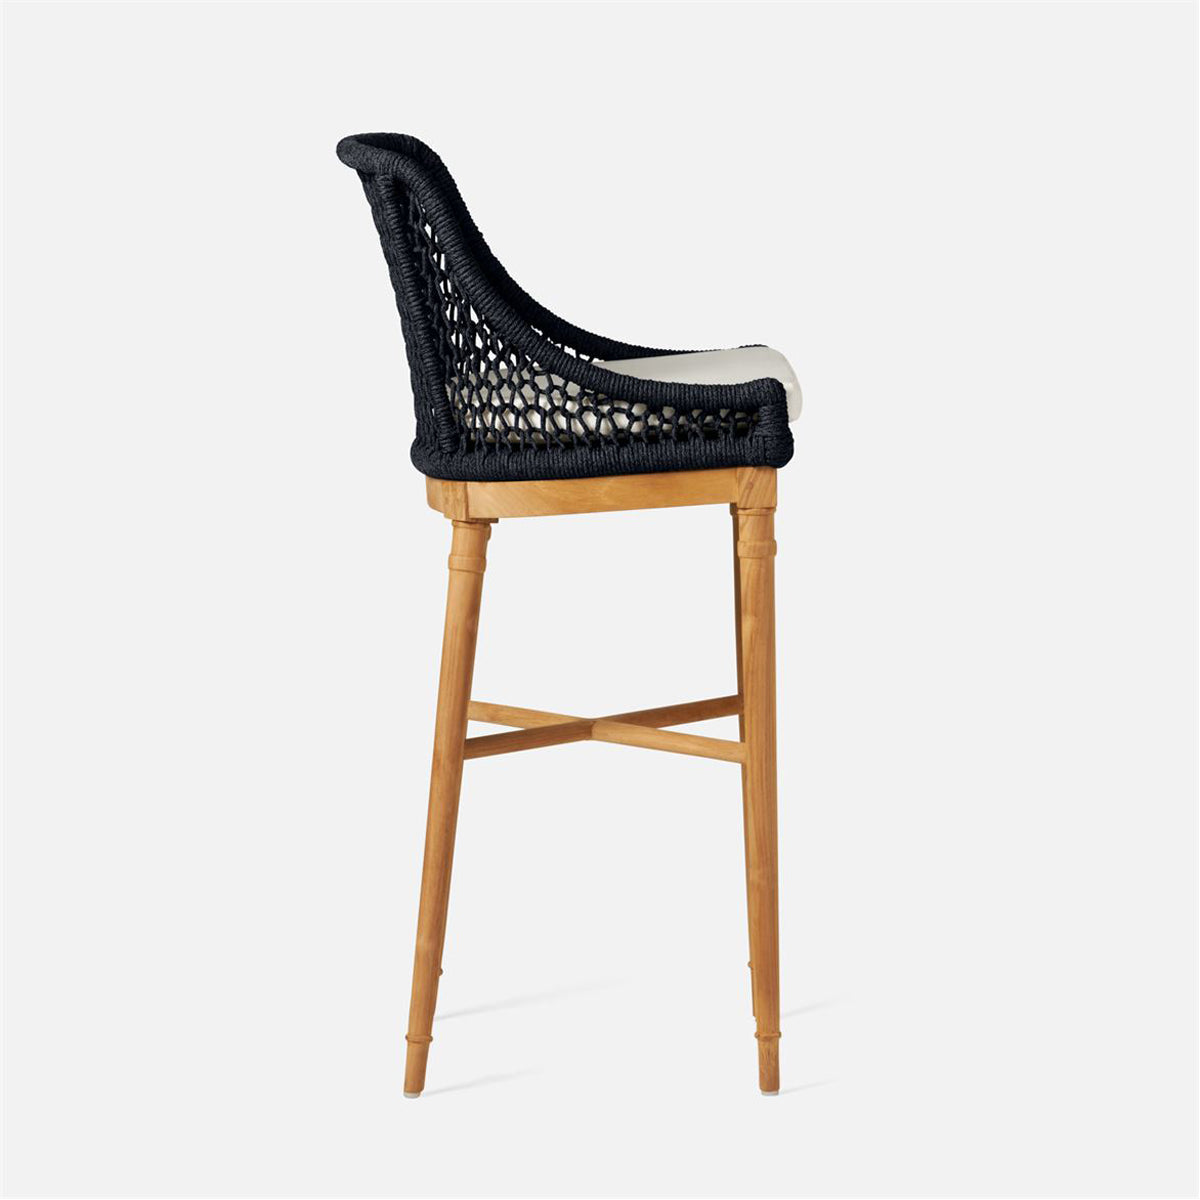 Made Goods Chadwick Woven Rope Outdoor Bar Stool in Alsek Fabric